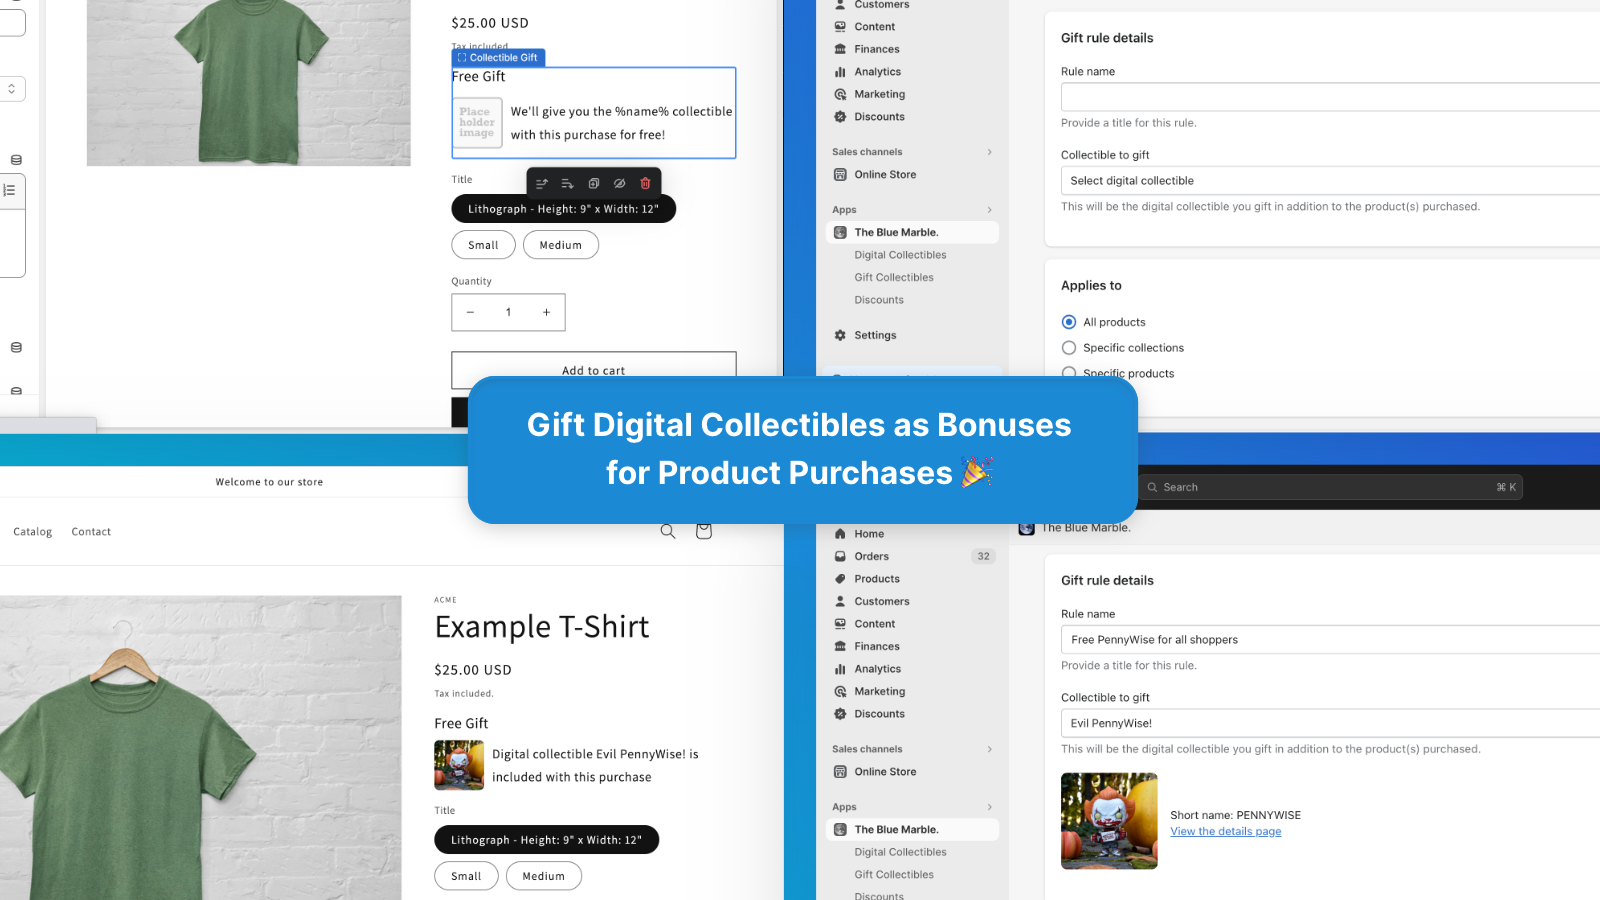 Gift Digital Collectibles as Bonuses for Product Purchases